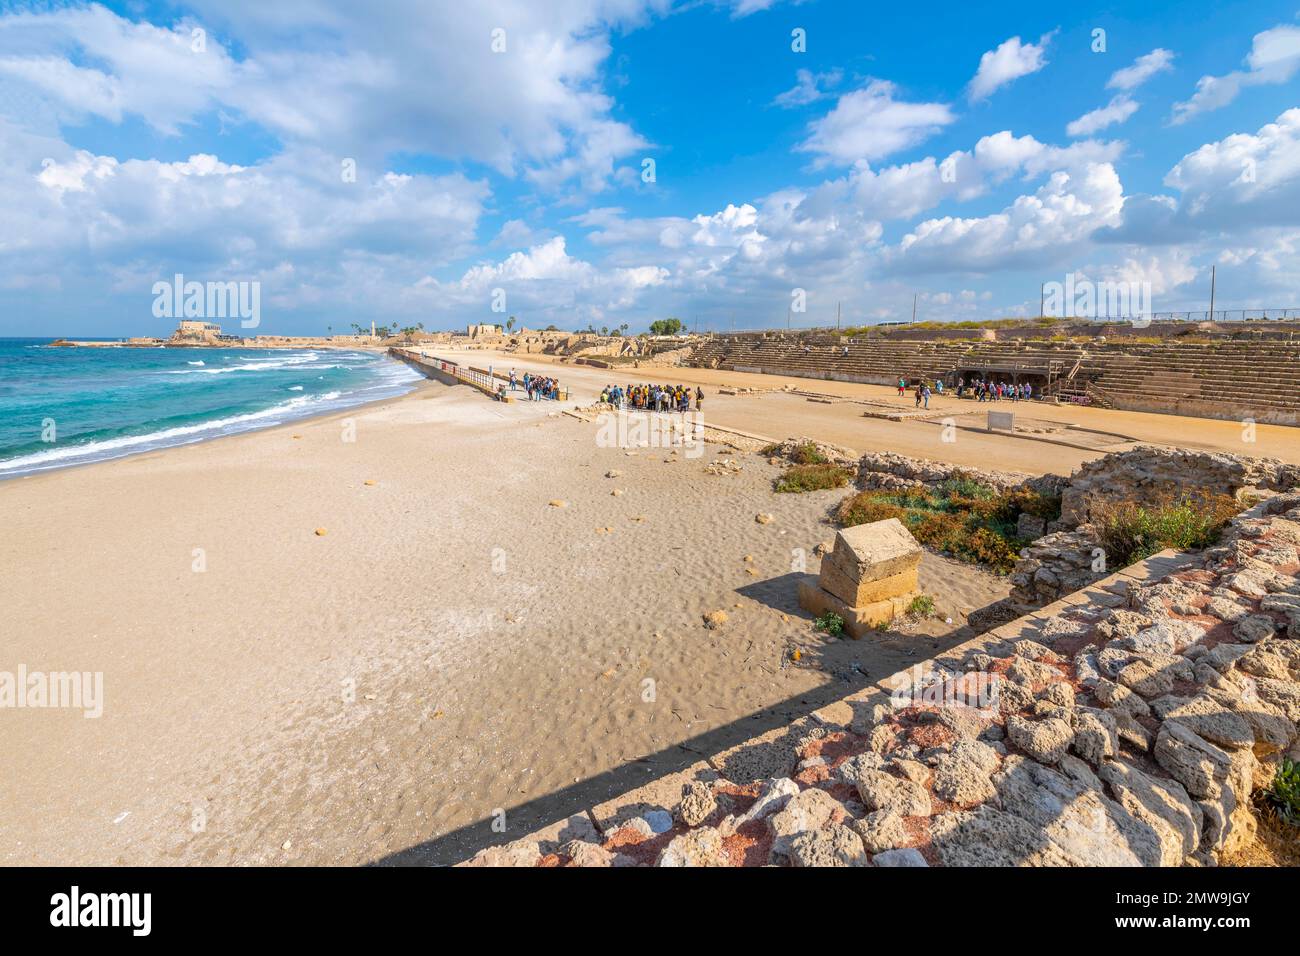 The ancient archaeological Caesarea National Park and and historic port on the Mediterranean coast of Caesarea, Israel. Stock Photo